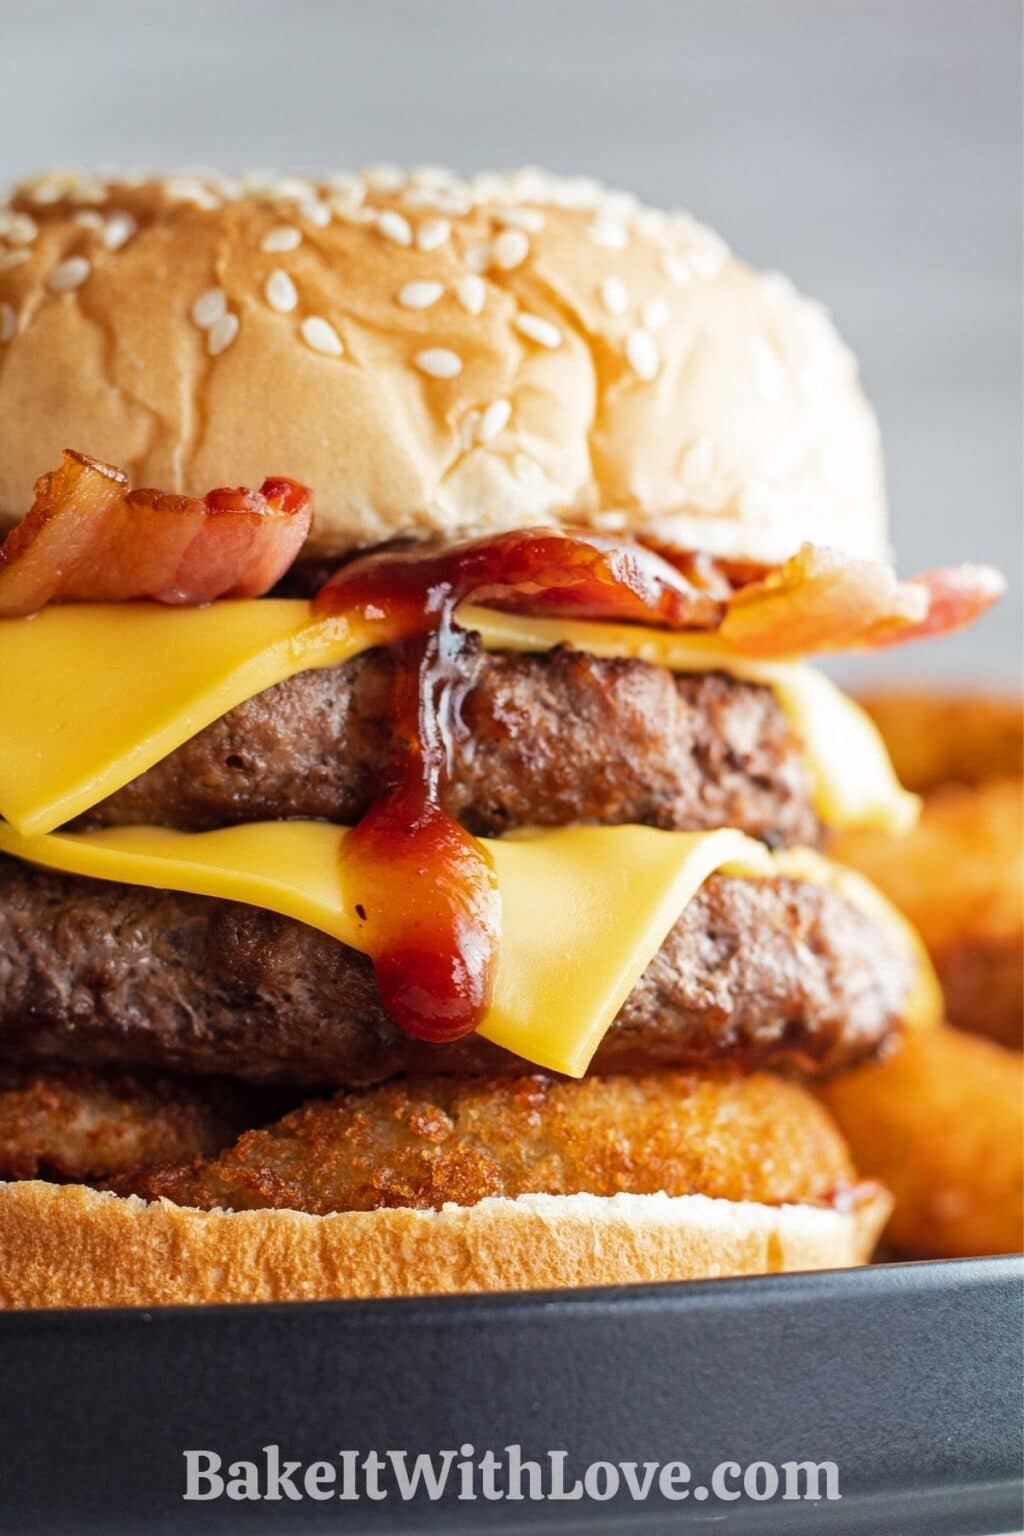 Western Bacon Cheeseburger (Hardee's or Carl's Jr) - Bake It With Love